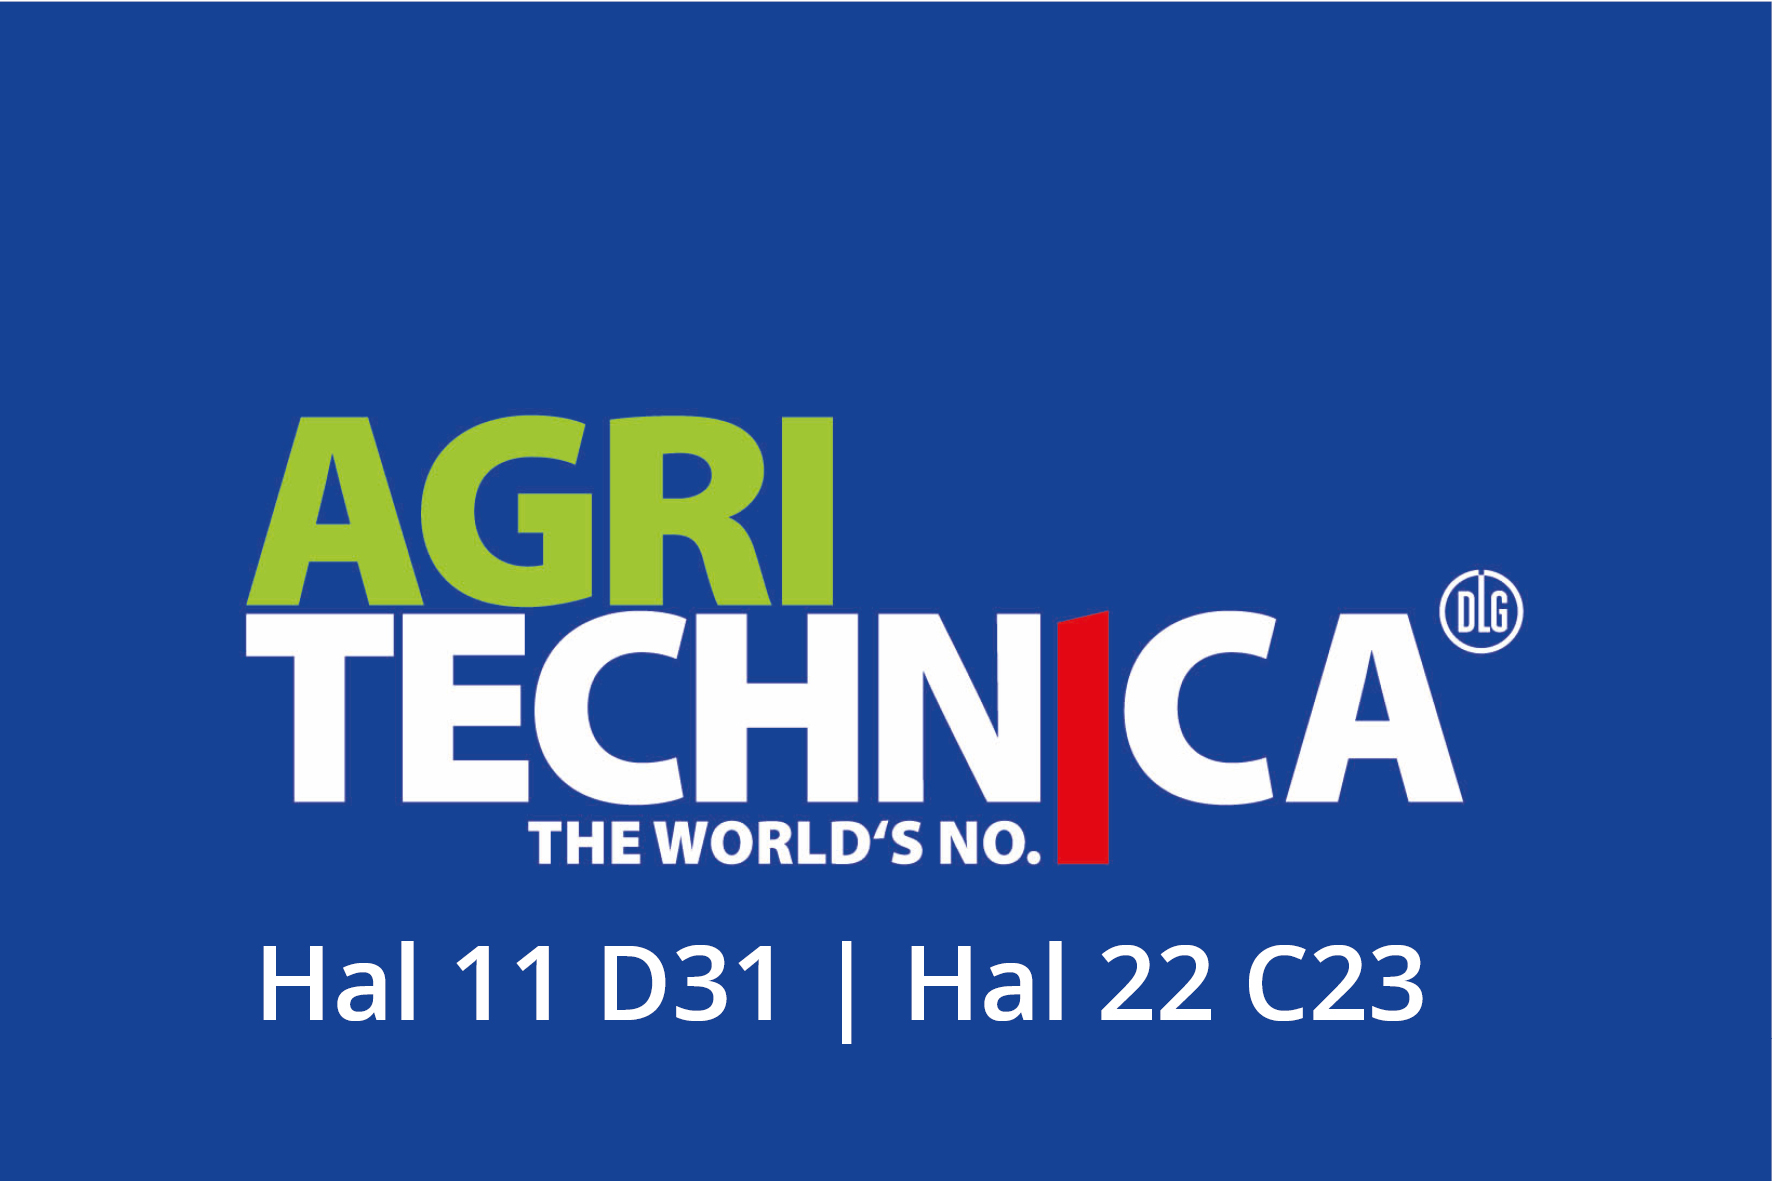 Evers presents 6 novelties at Agritechnica 